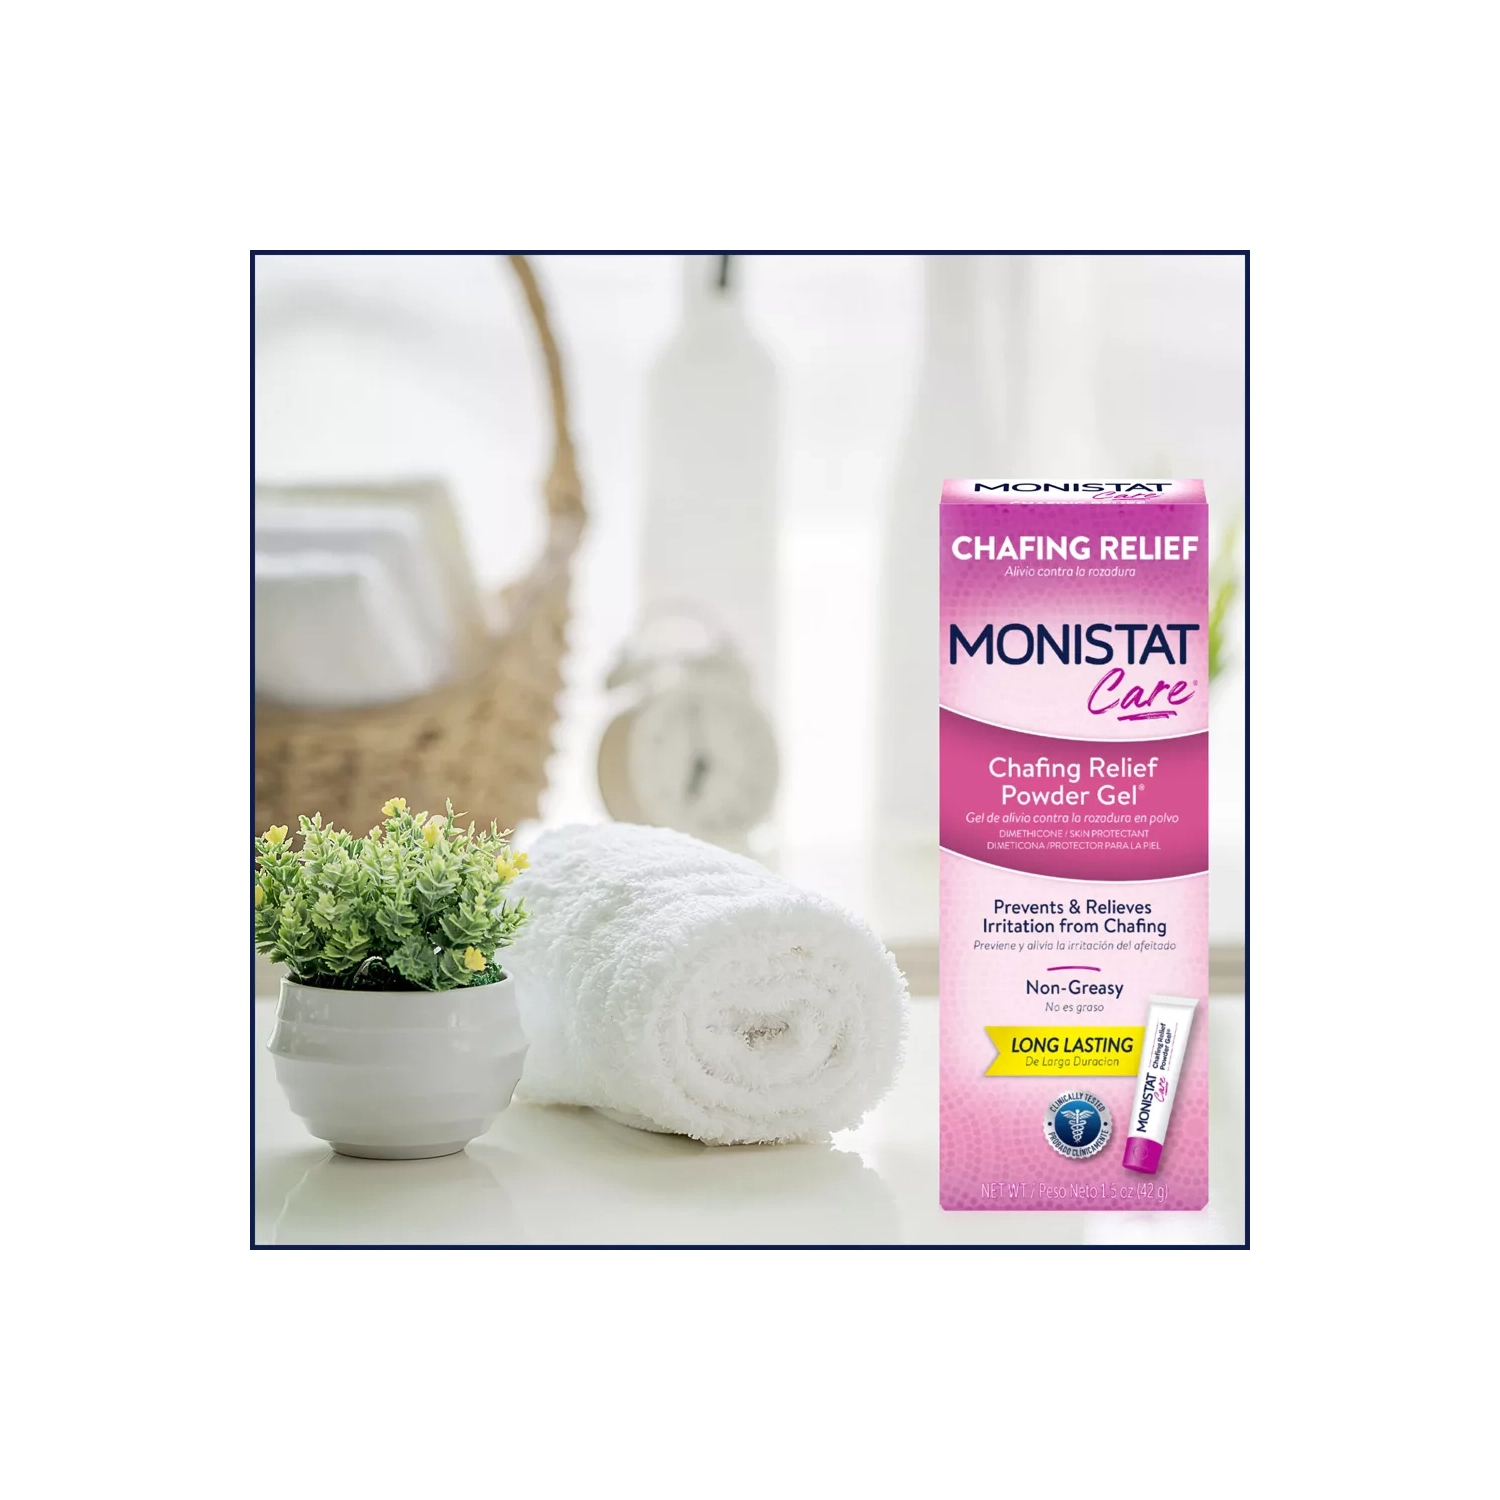 Monistat Care Feminine Chafing Relief Powder Gel, Anti-Chafe Protection - 1.5  oz, 2-Pack